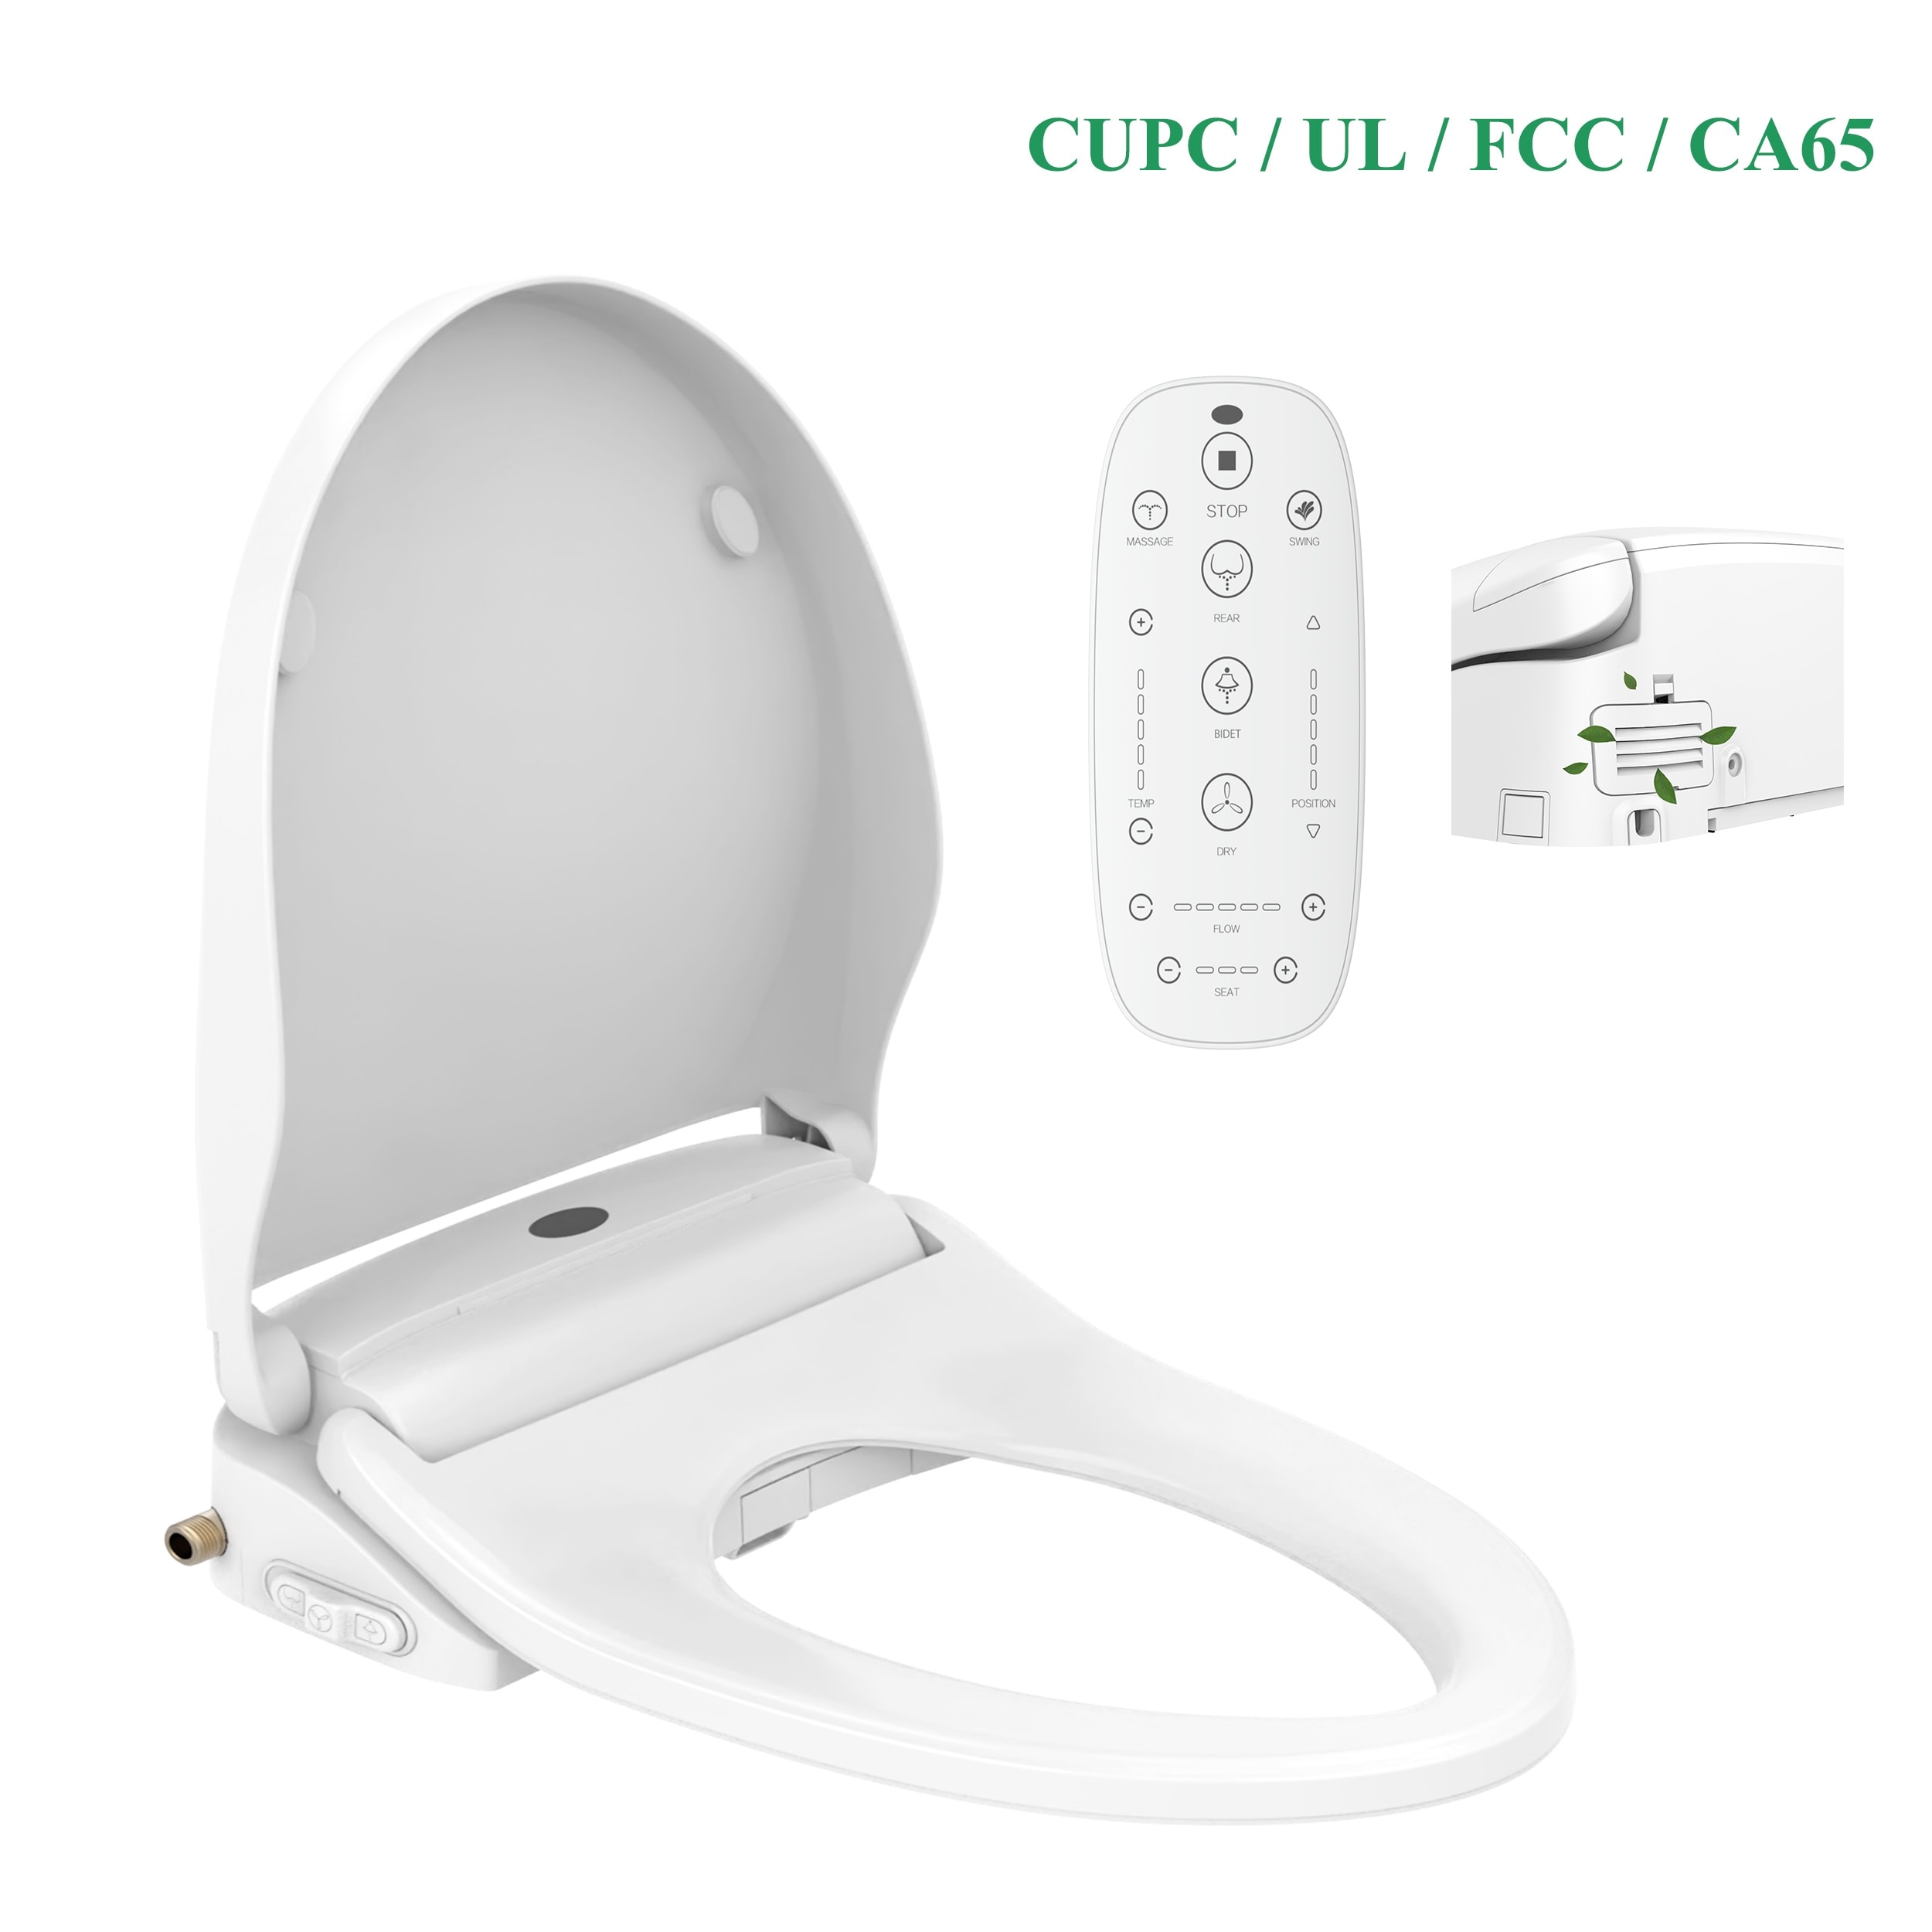 https://ak1.ostkcdn.com/images/products/is/images/direct/d90dcb9ec449cf73de7ac385920a481c7741d059/Elongated-LED-Soft-Close-and-Heated-Smart-Toilet-Seats-for-Standard-Toilets-with-Remote.jpg